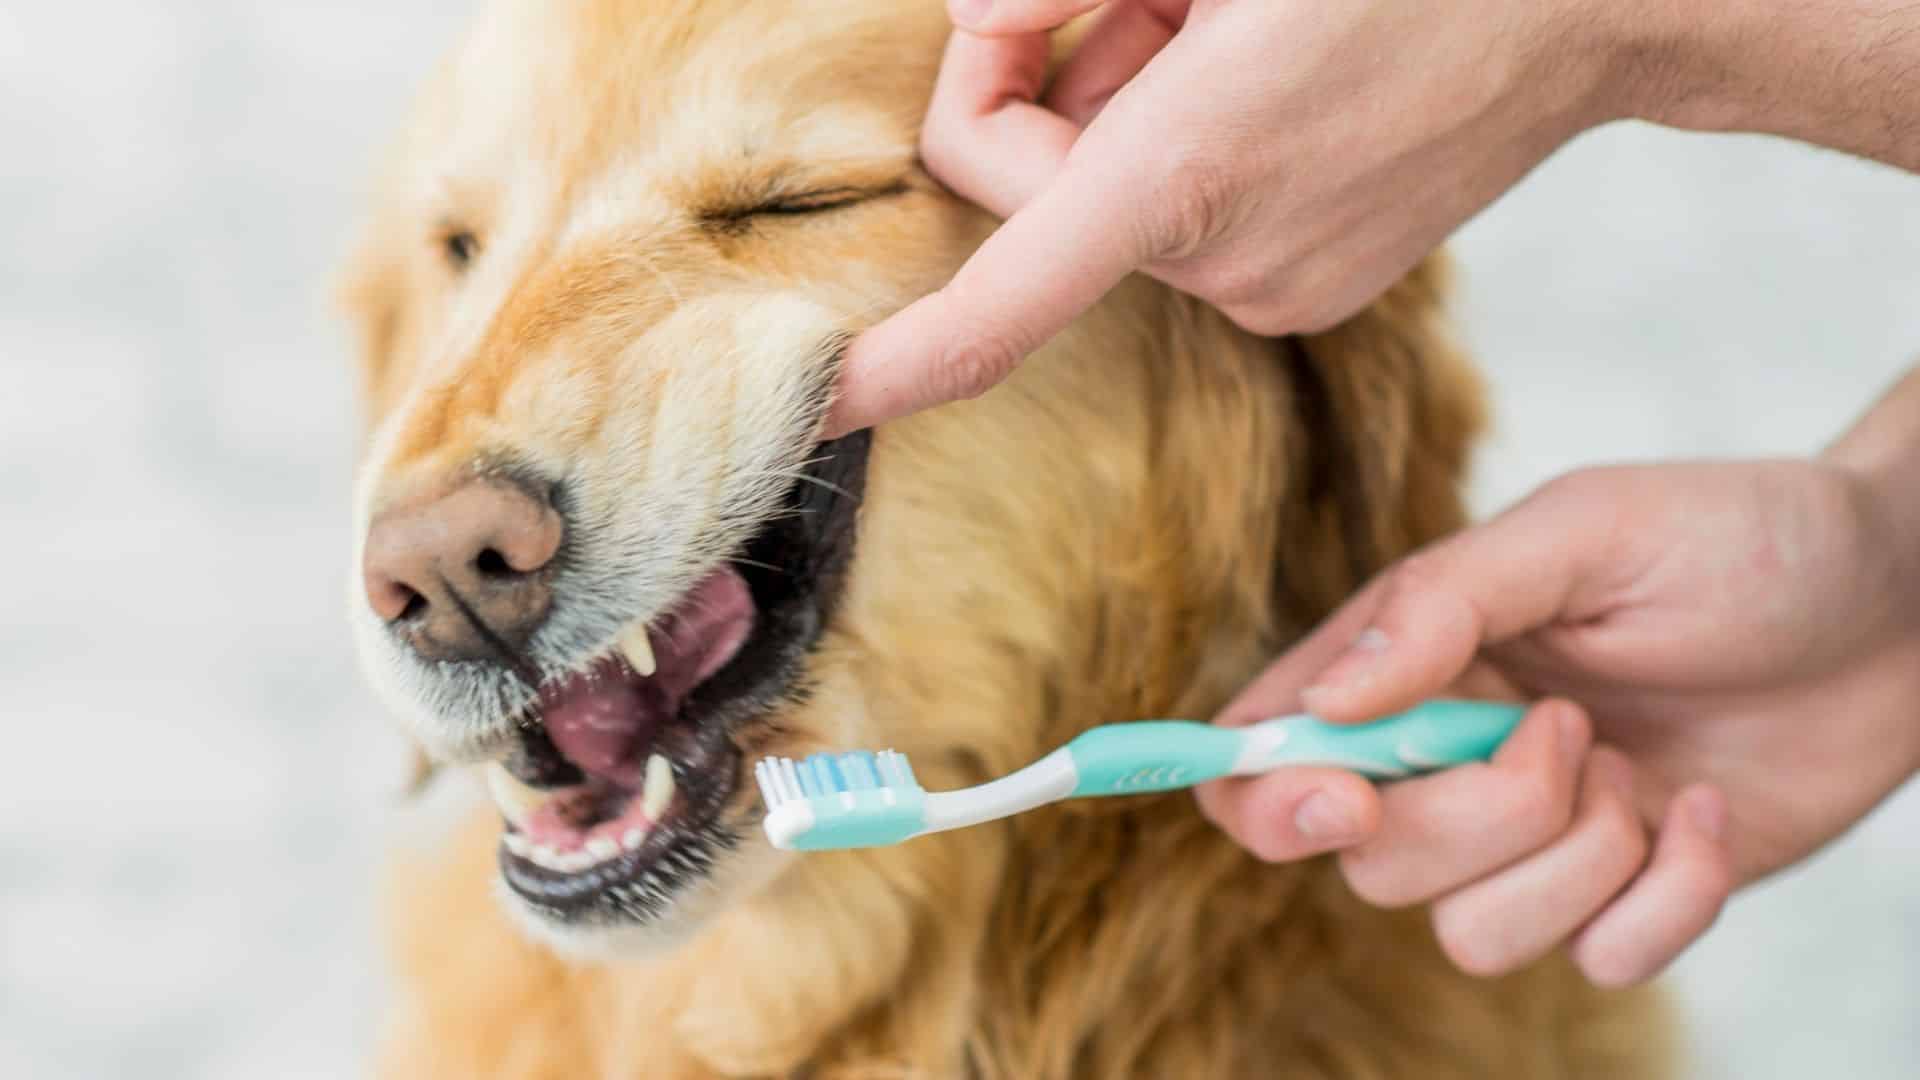 How to use mouthwash for dogs: a pet parent guide